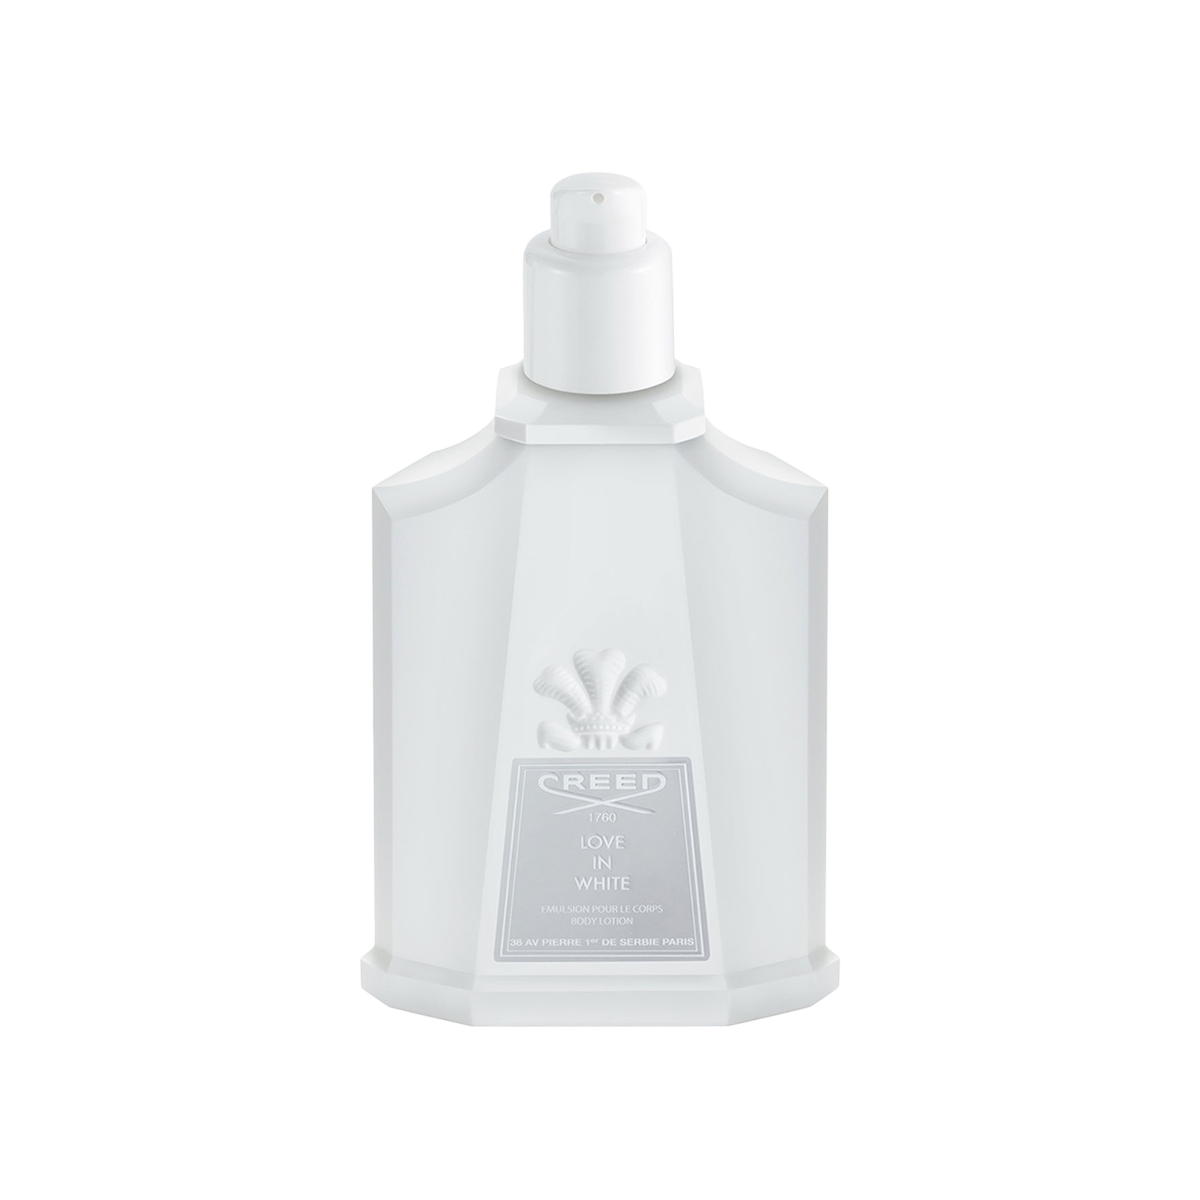 Creed - Love in White Body Lotion